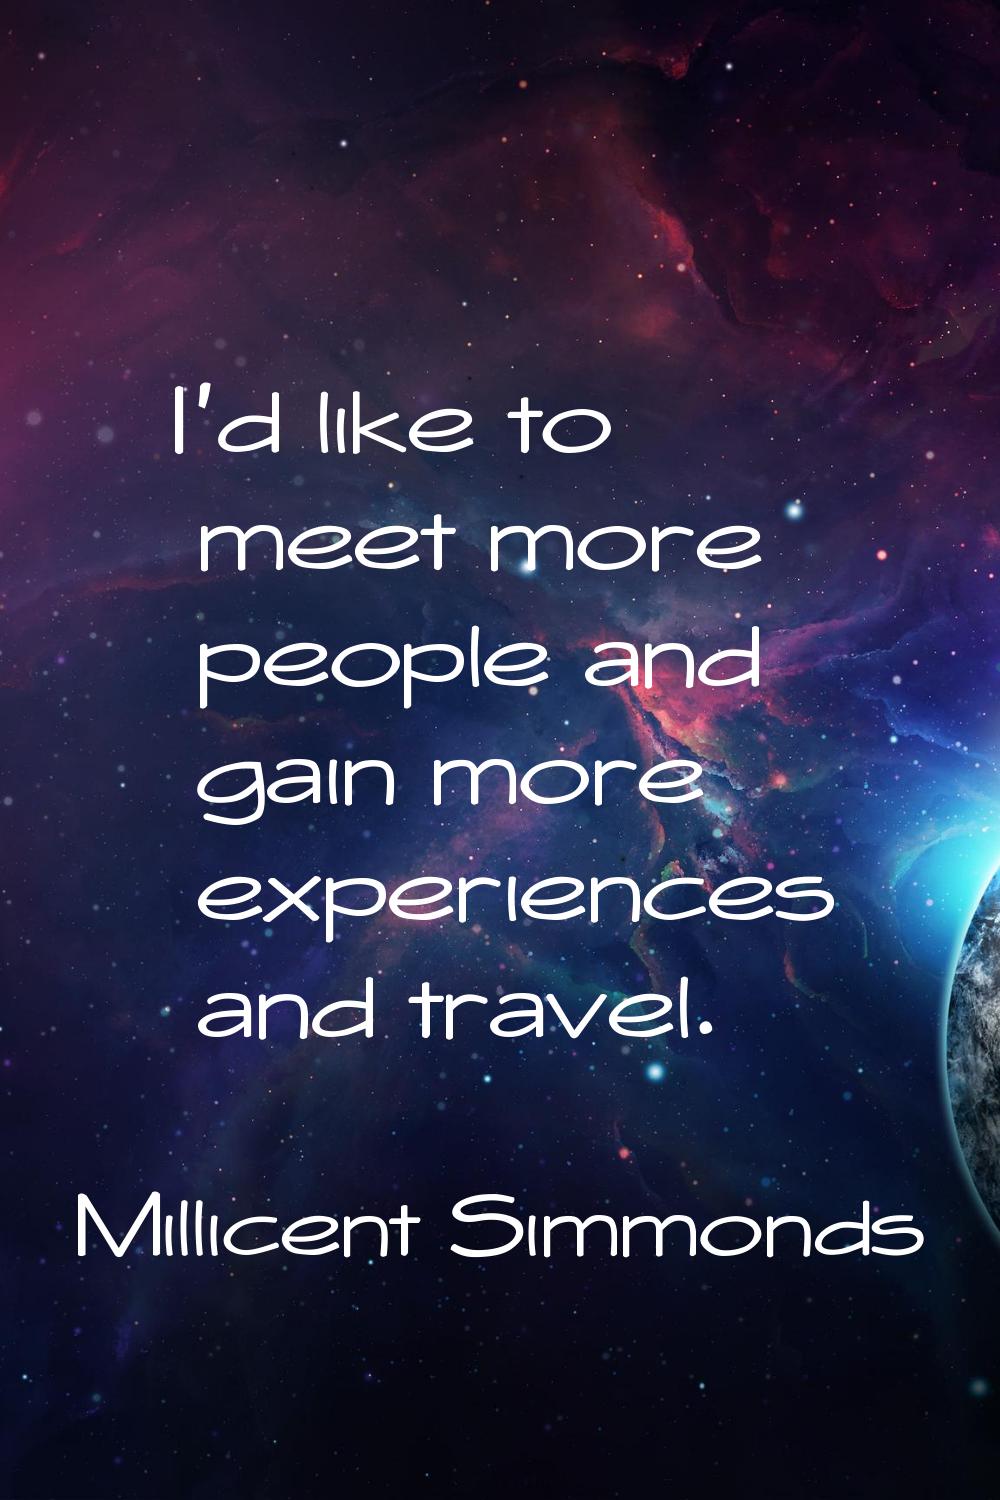 I'd like to meet more people and gain more experiences and travel.